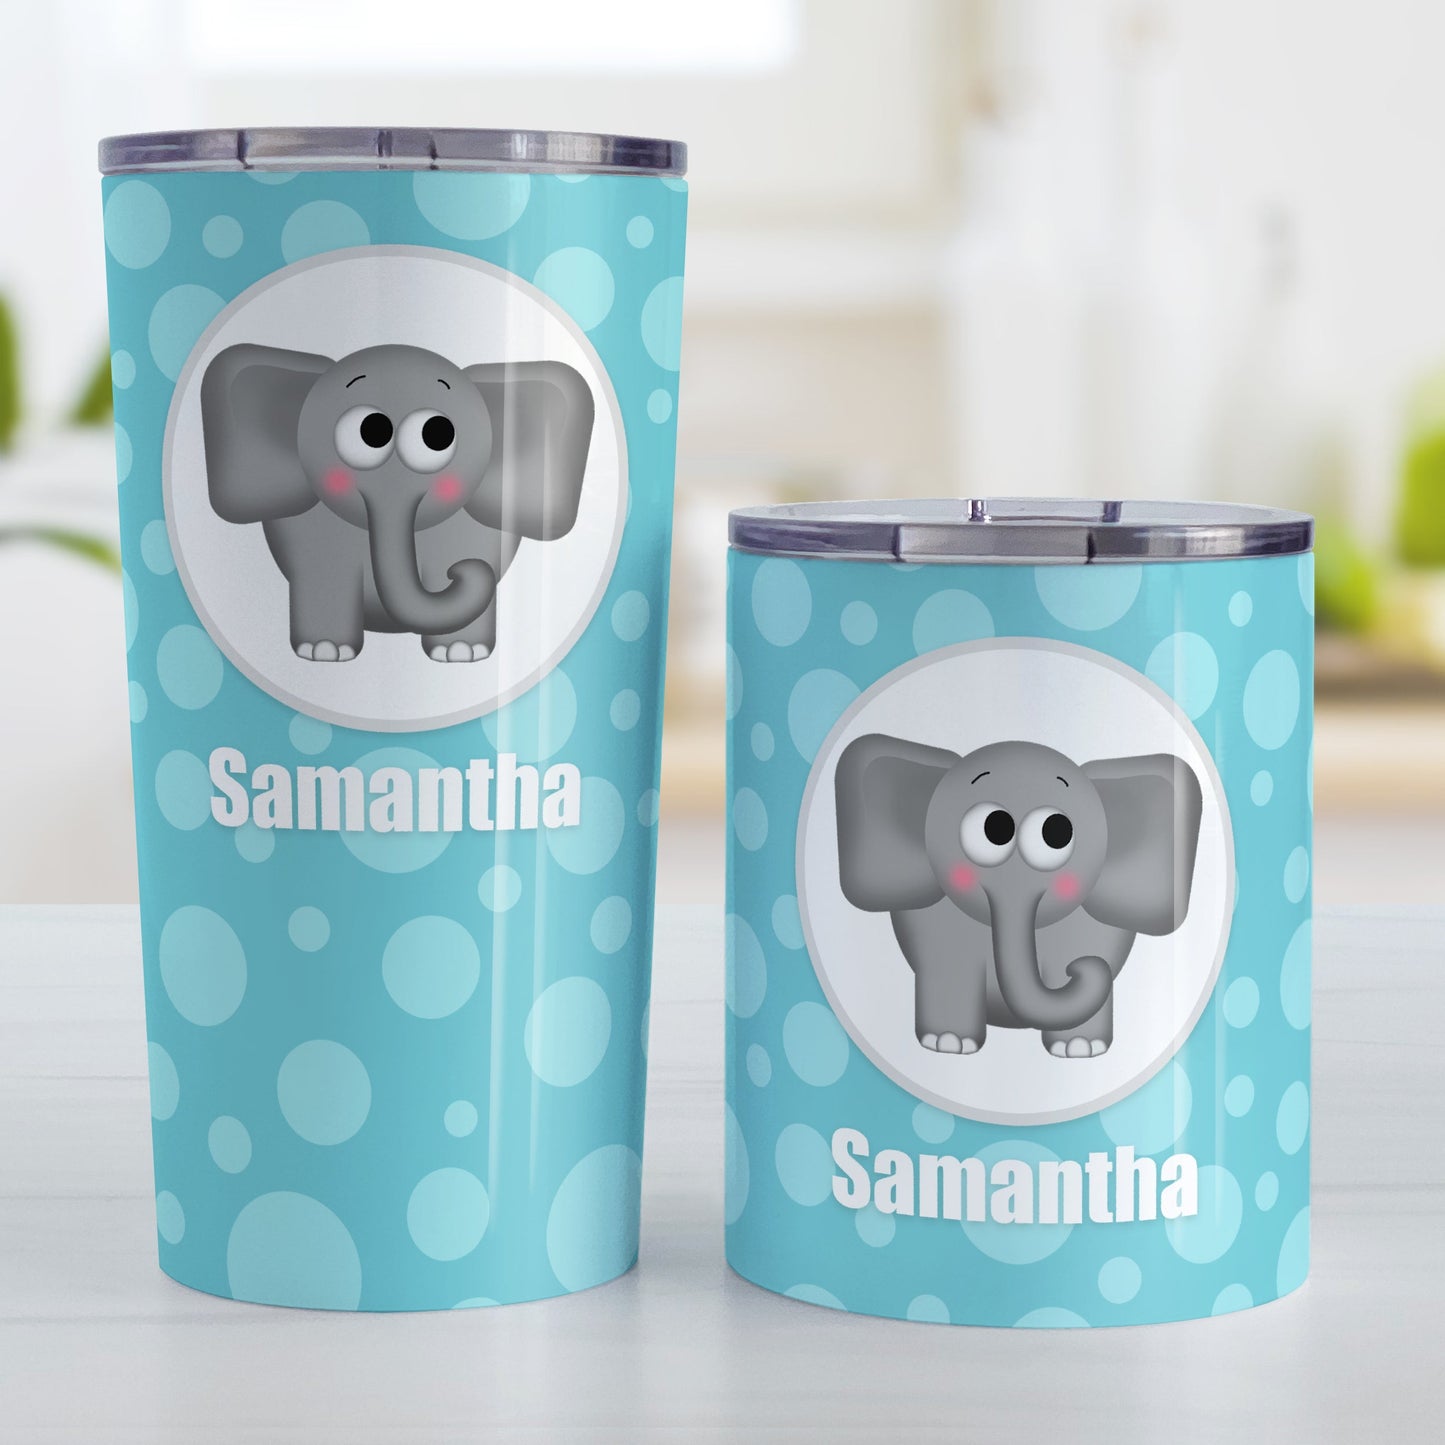 Cute Elephant Bubbly Turquoise Personalized Tumbler Cup (20oz and 10oz, stainless steel insulated) at Amy's Coffee Mugs